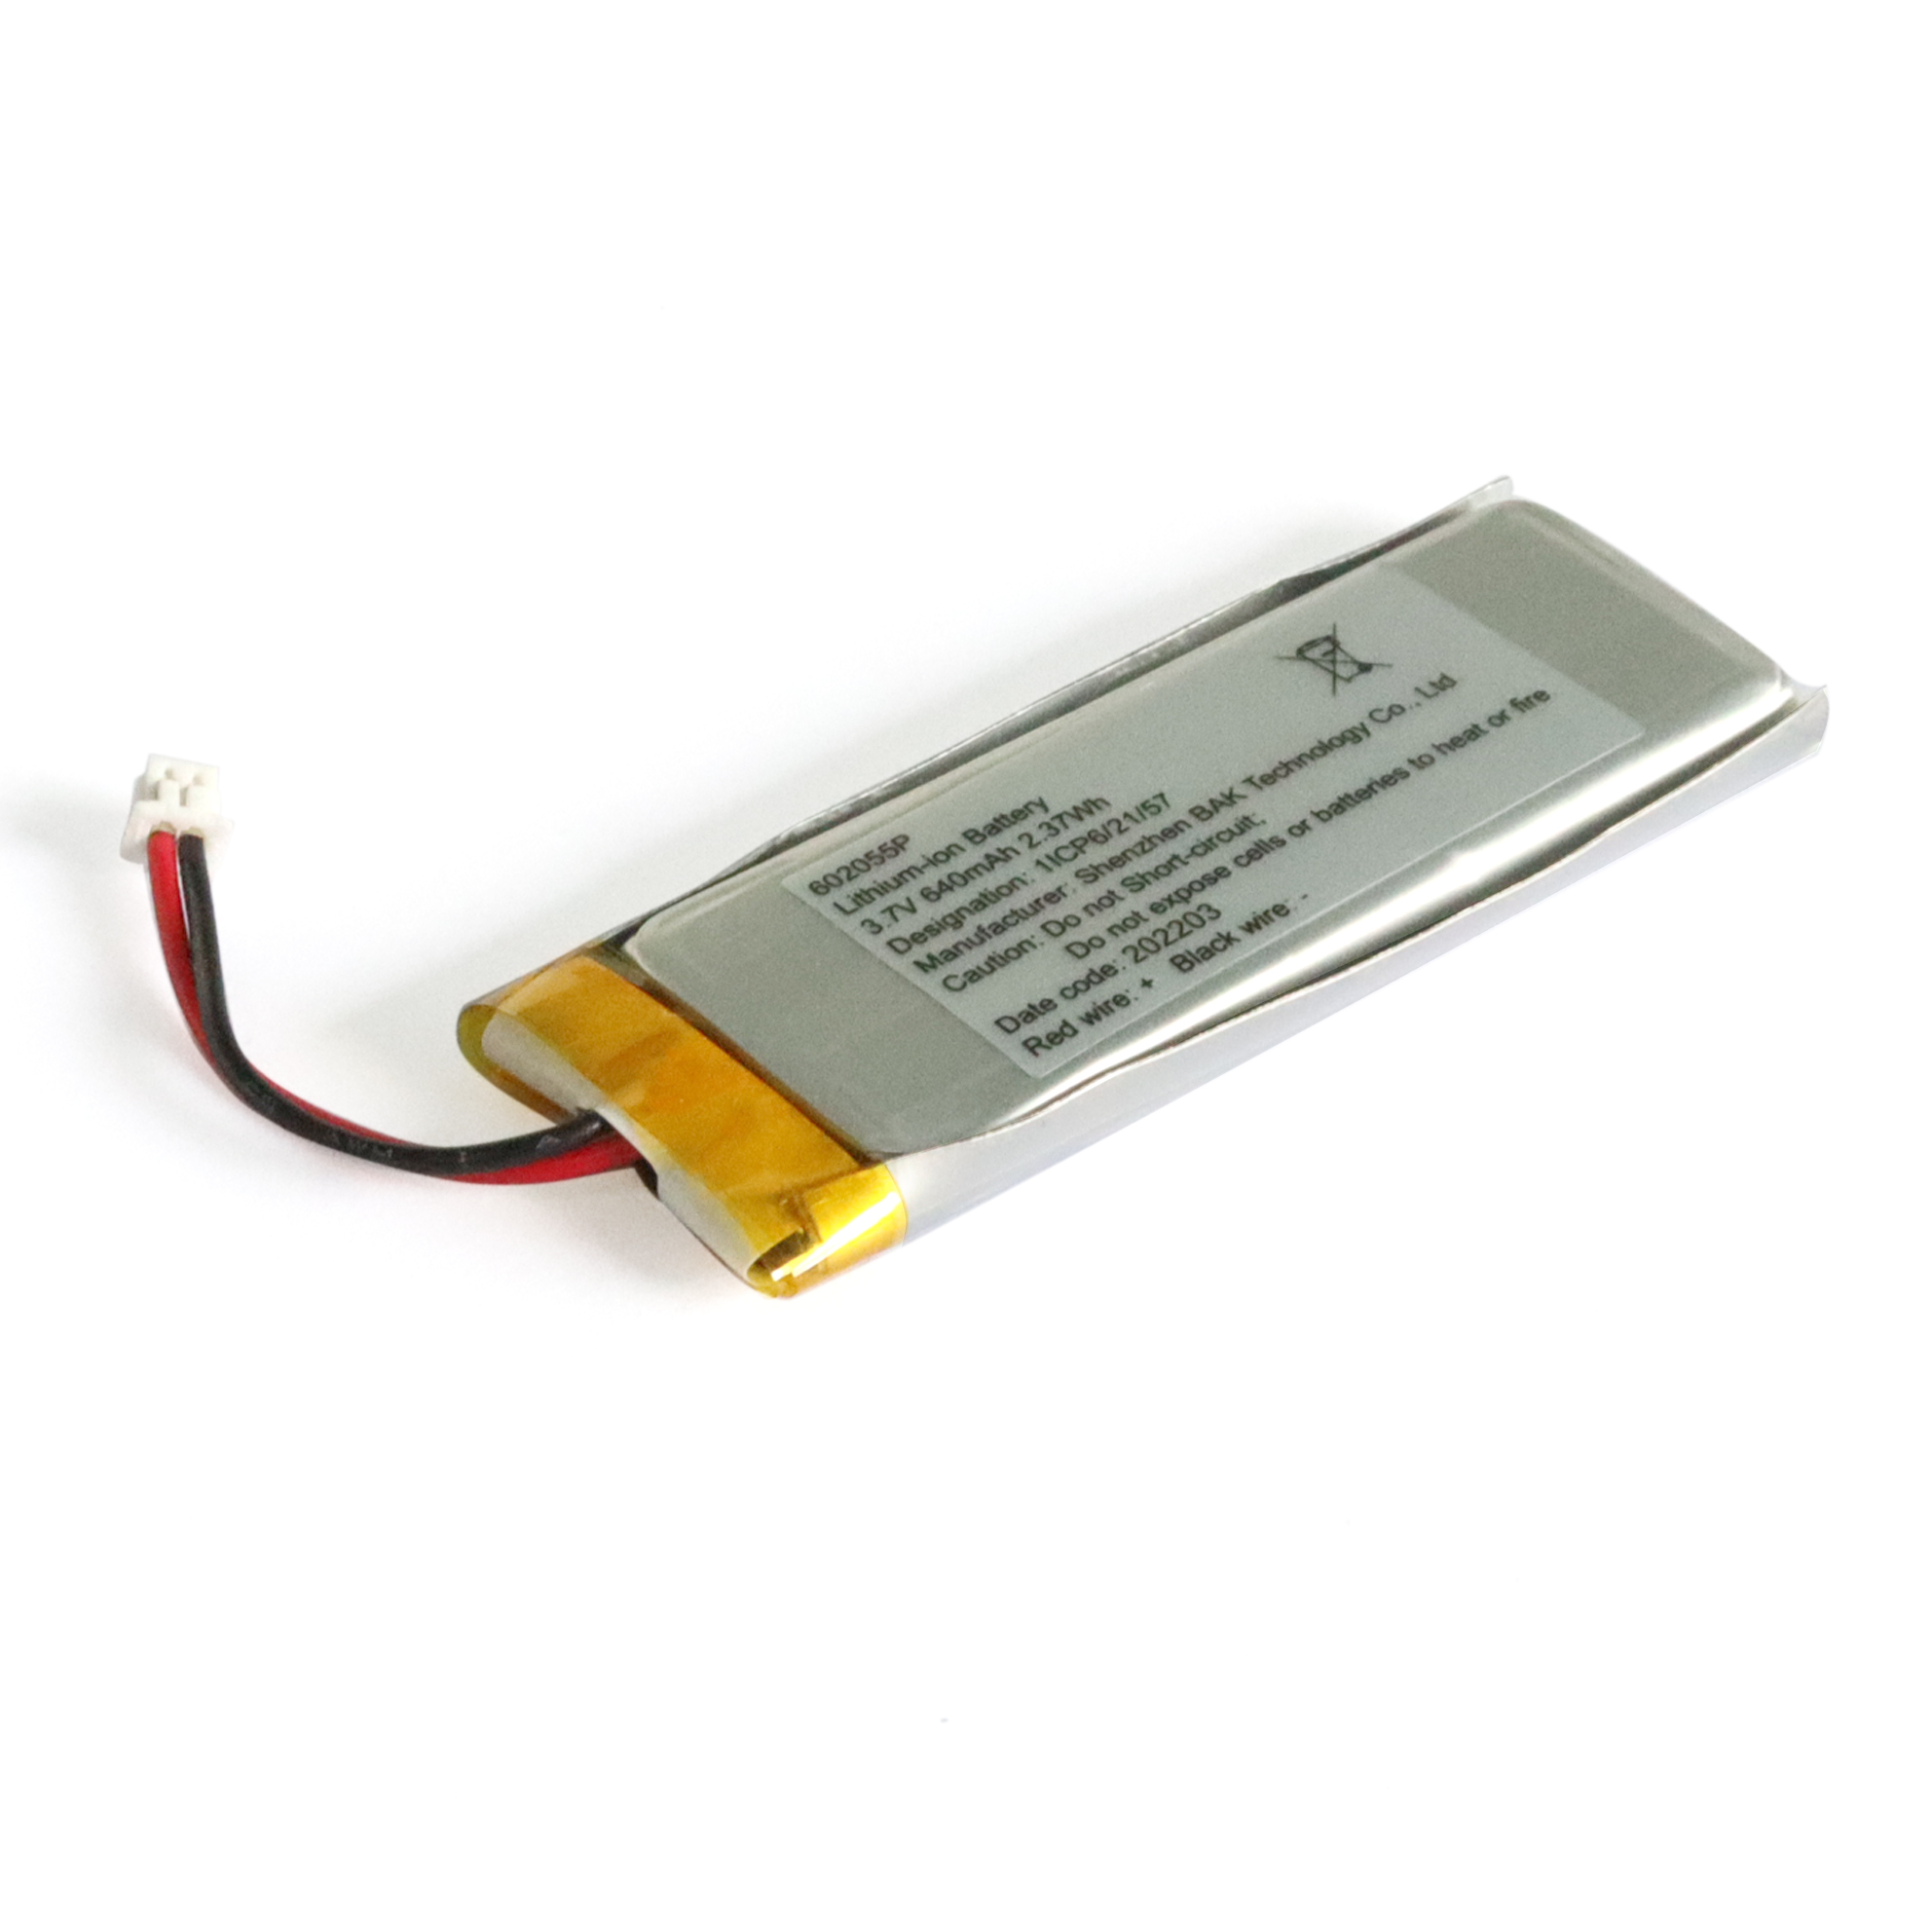 Rechargeable Polymer Lithium Battery Li-ion Polymer 3.7V 640mAh Battery Cell with PCM